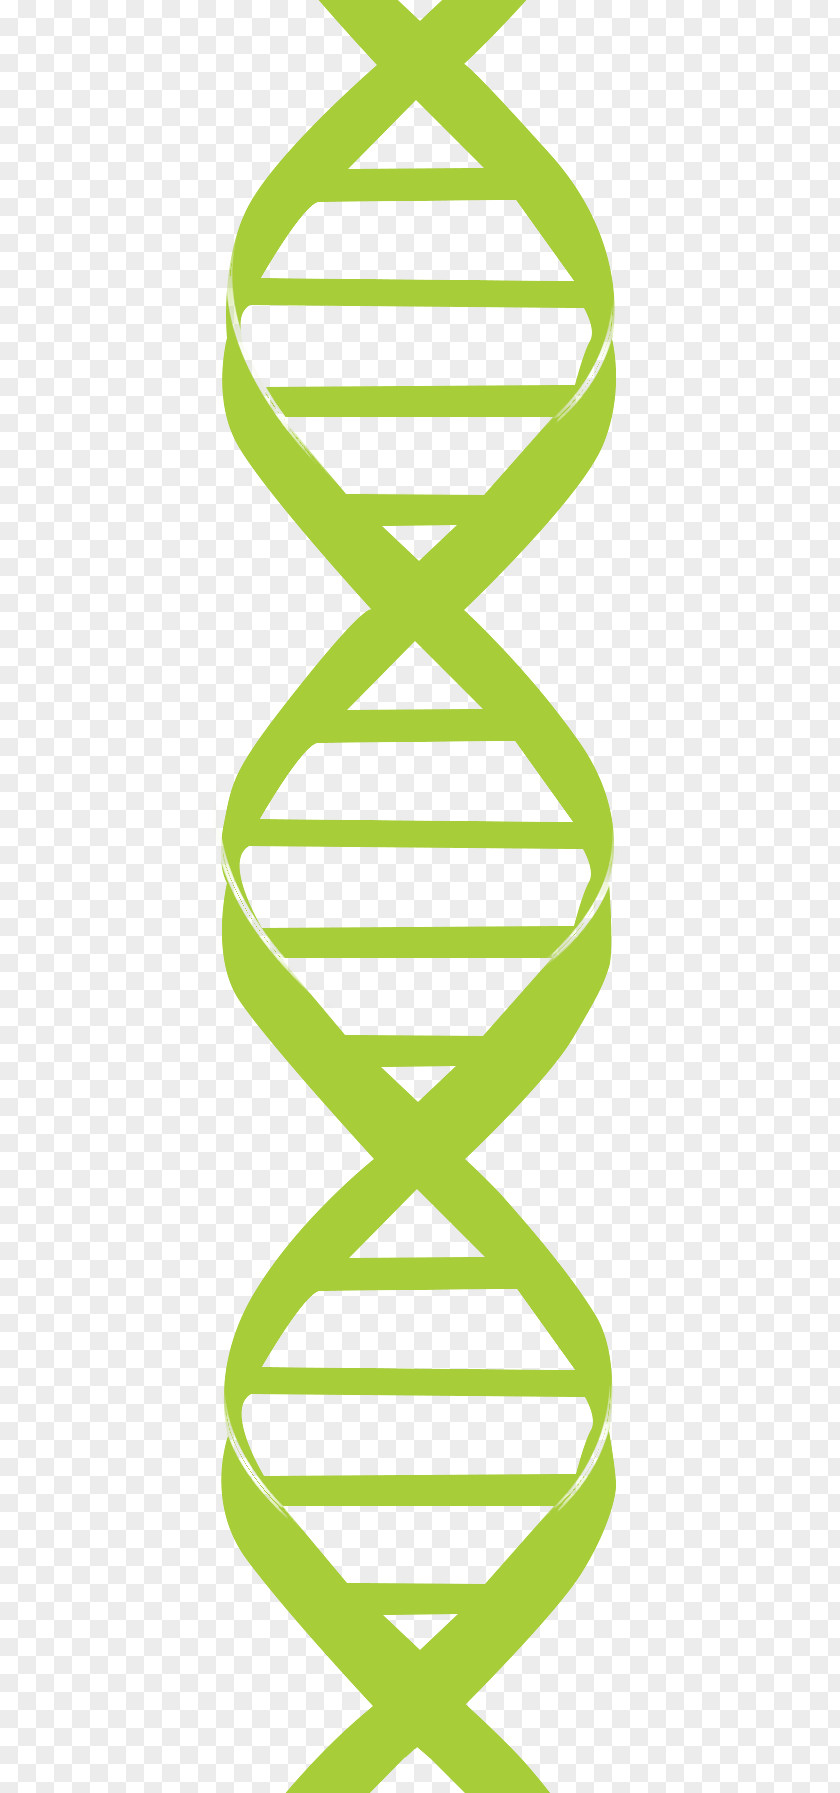 Dna Strand Clip Art Nucleic Acid Double Helix DNA Genetics PNG